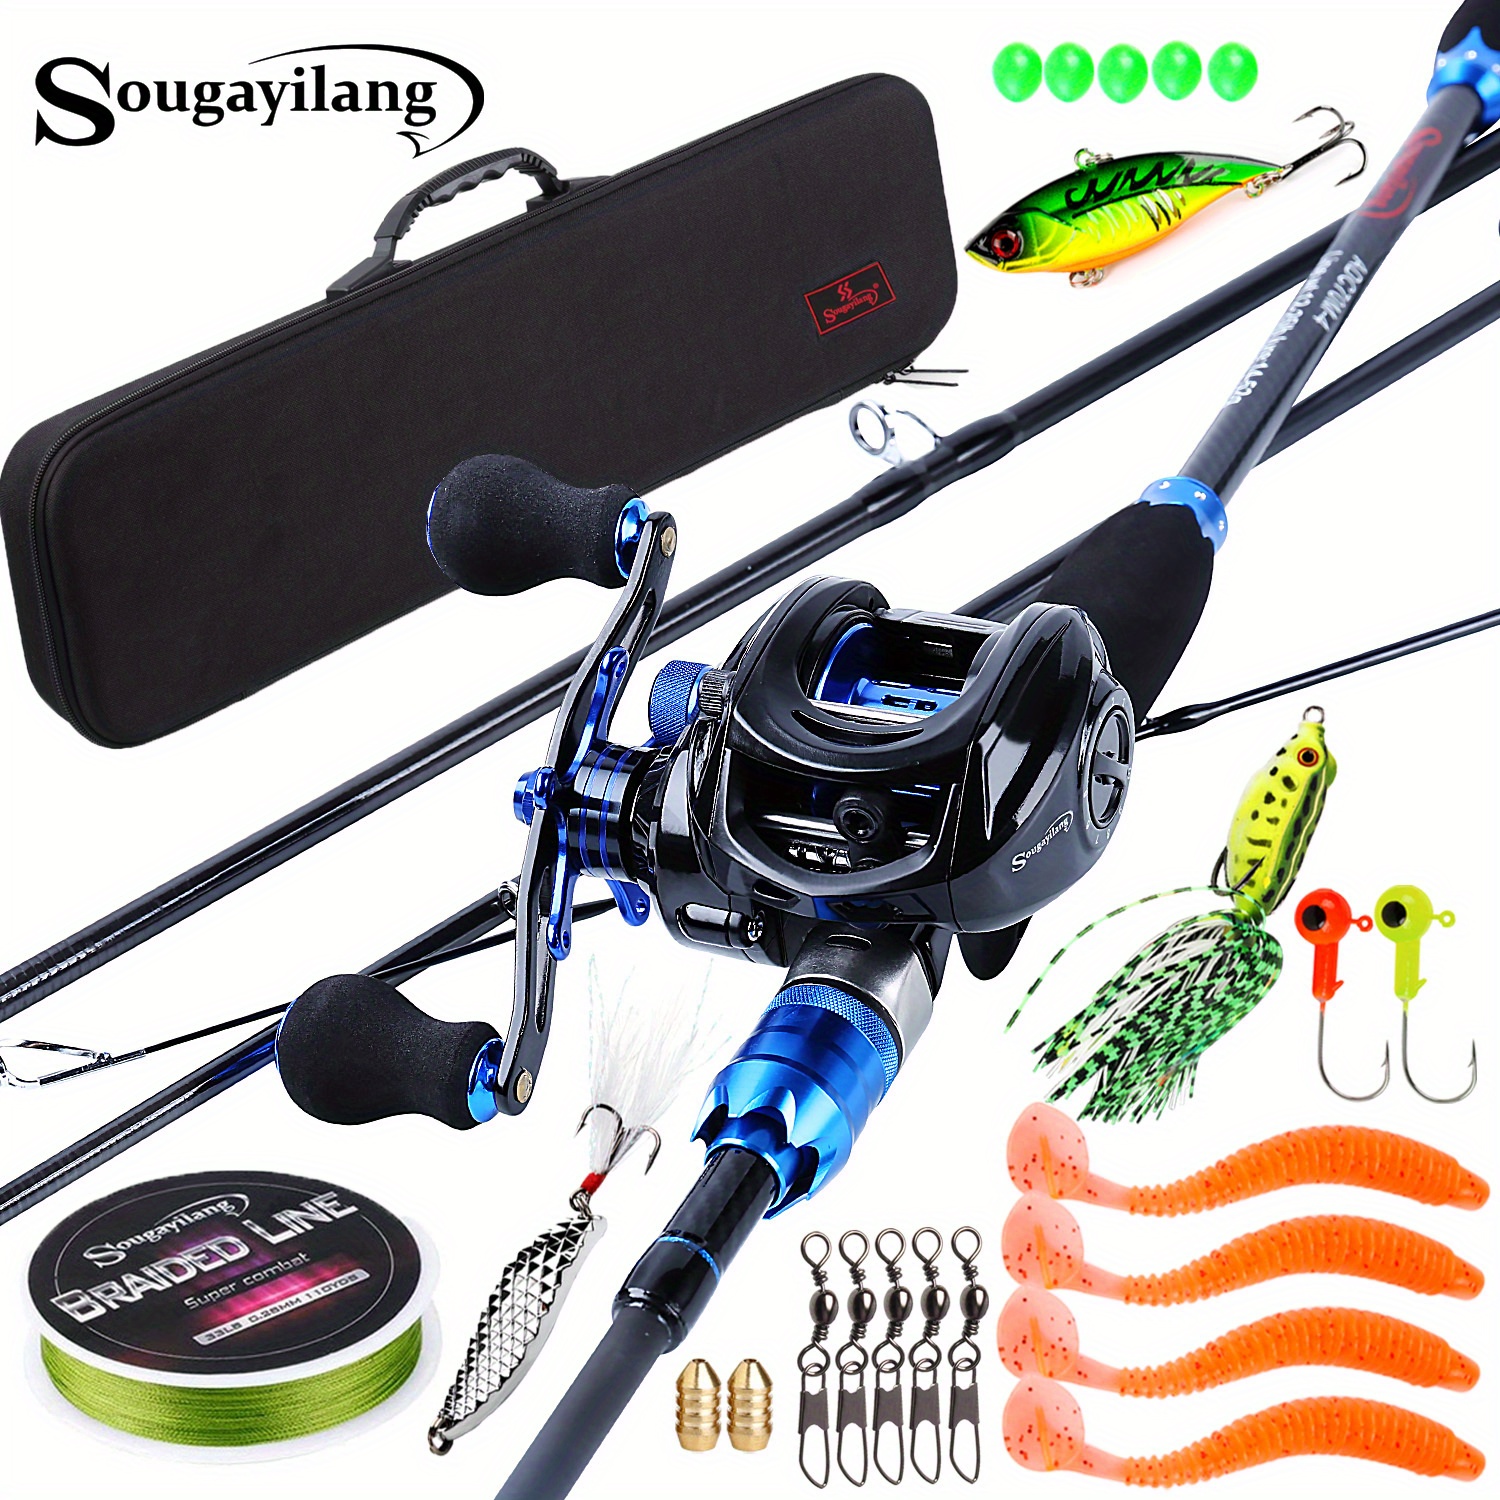 Sougayilang Spinning Fishing Reel and Rod Combo 1.8m/2.1M Bass Fishing Rod  and Spinning Fishing Reels with Fishing Line Full Kit